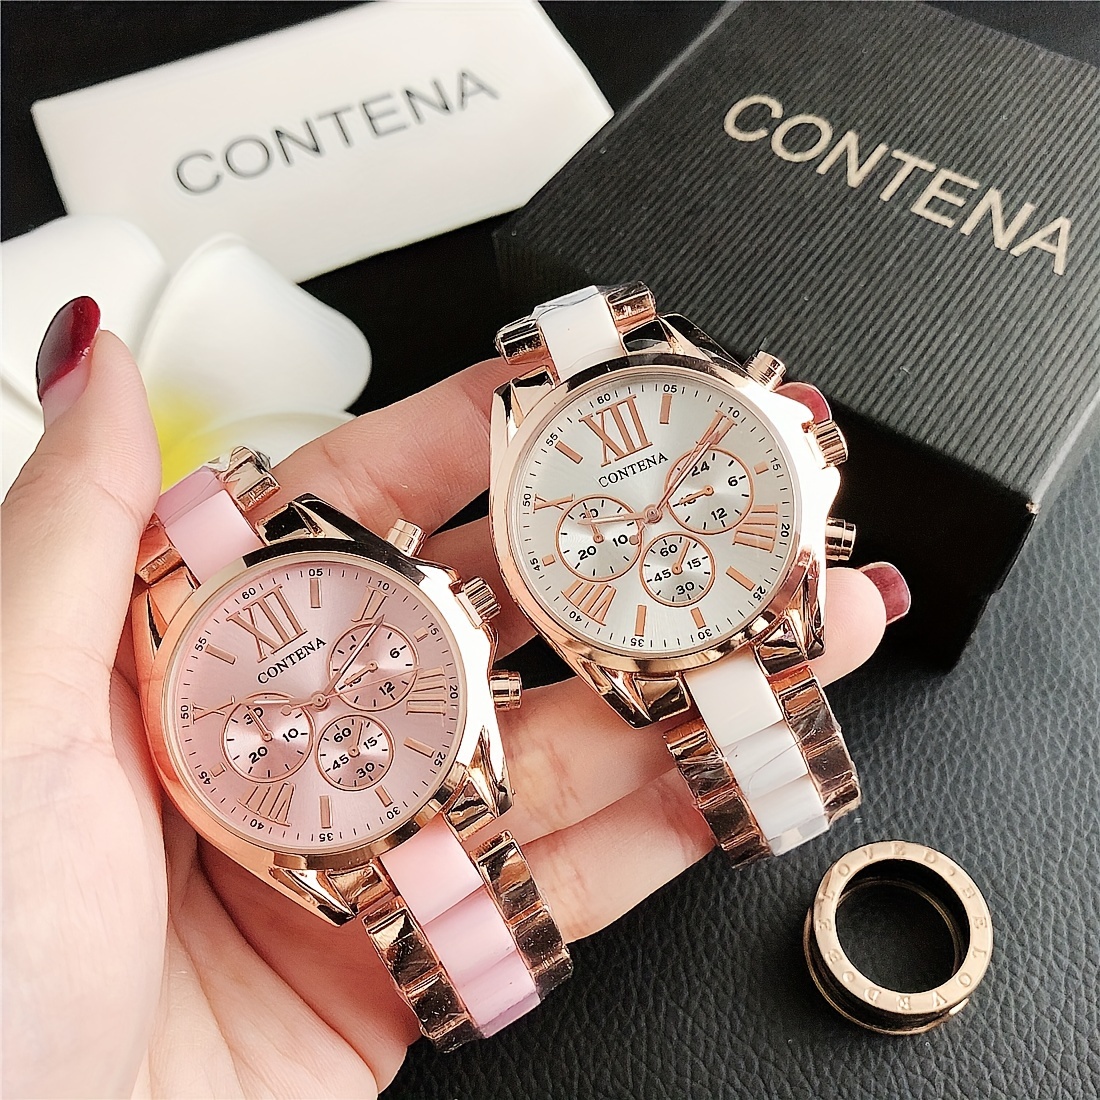 

1pc Matching Contena Luxury Rose Golden Quartz Watches, Women's Fashion Wristwatch Set With Roman Numerals, Elegant Female Timepieces For Daily Life And Travel (watch Only)